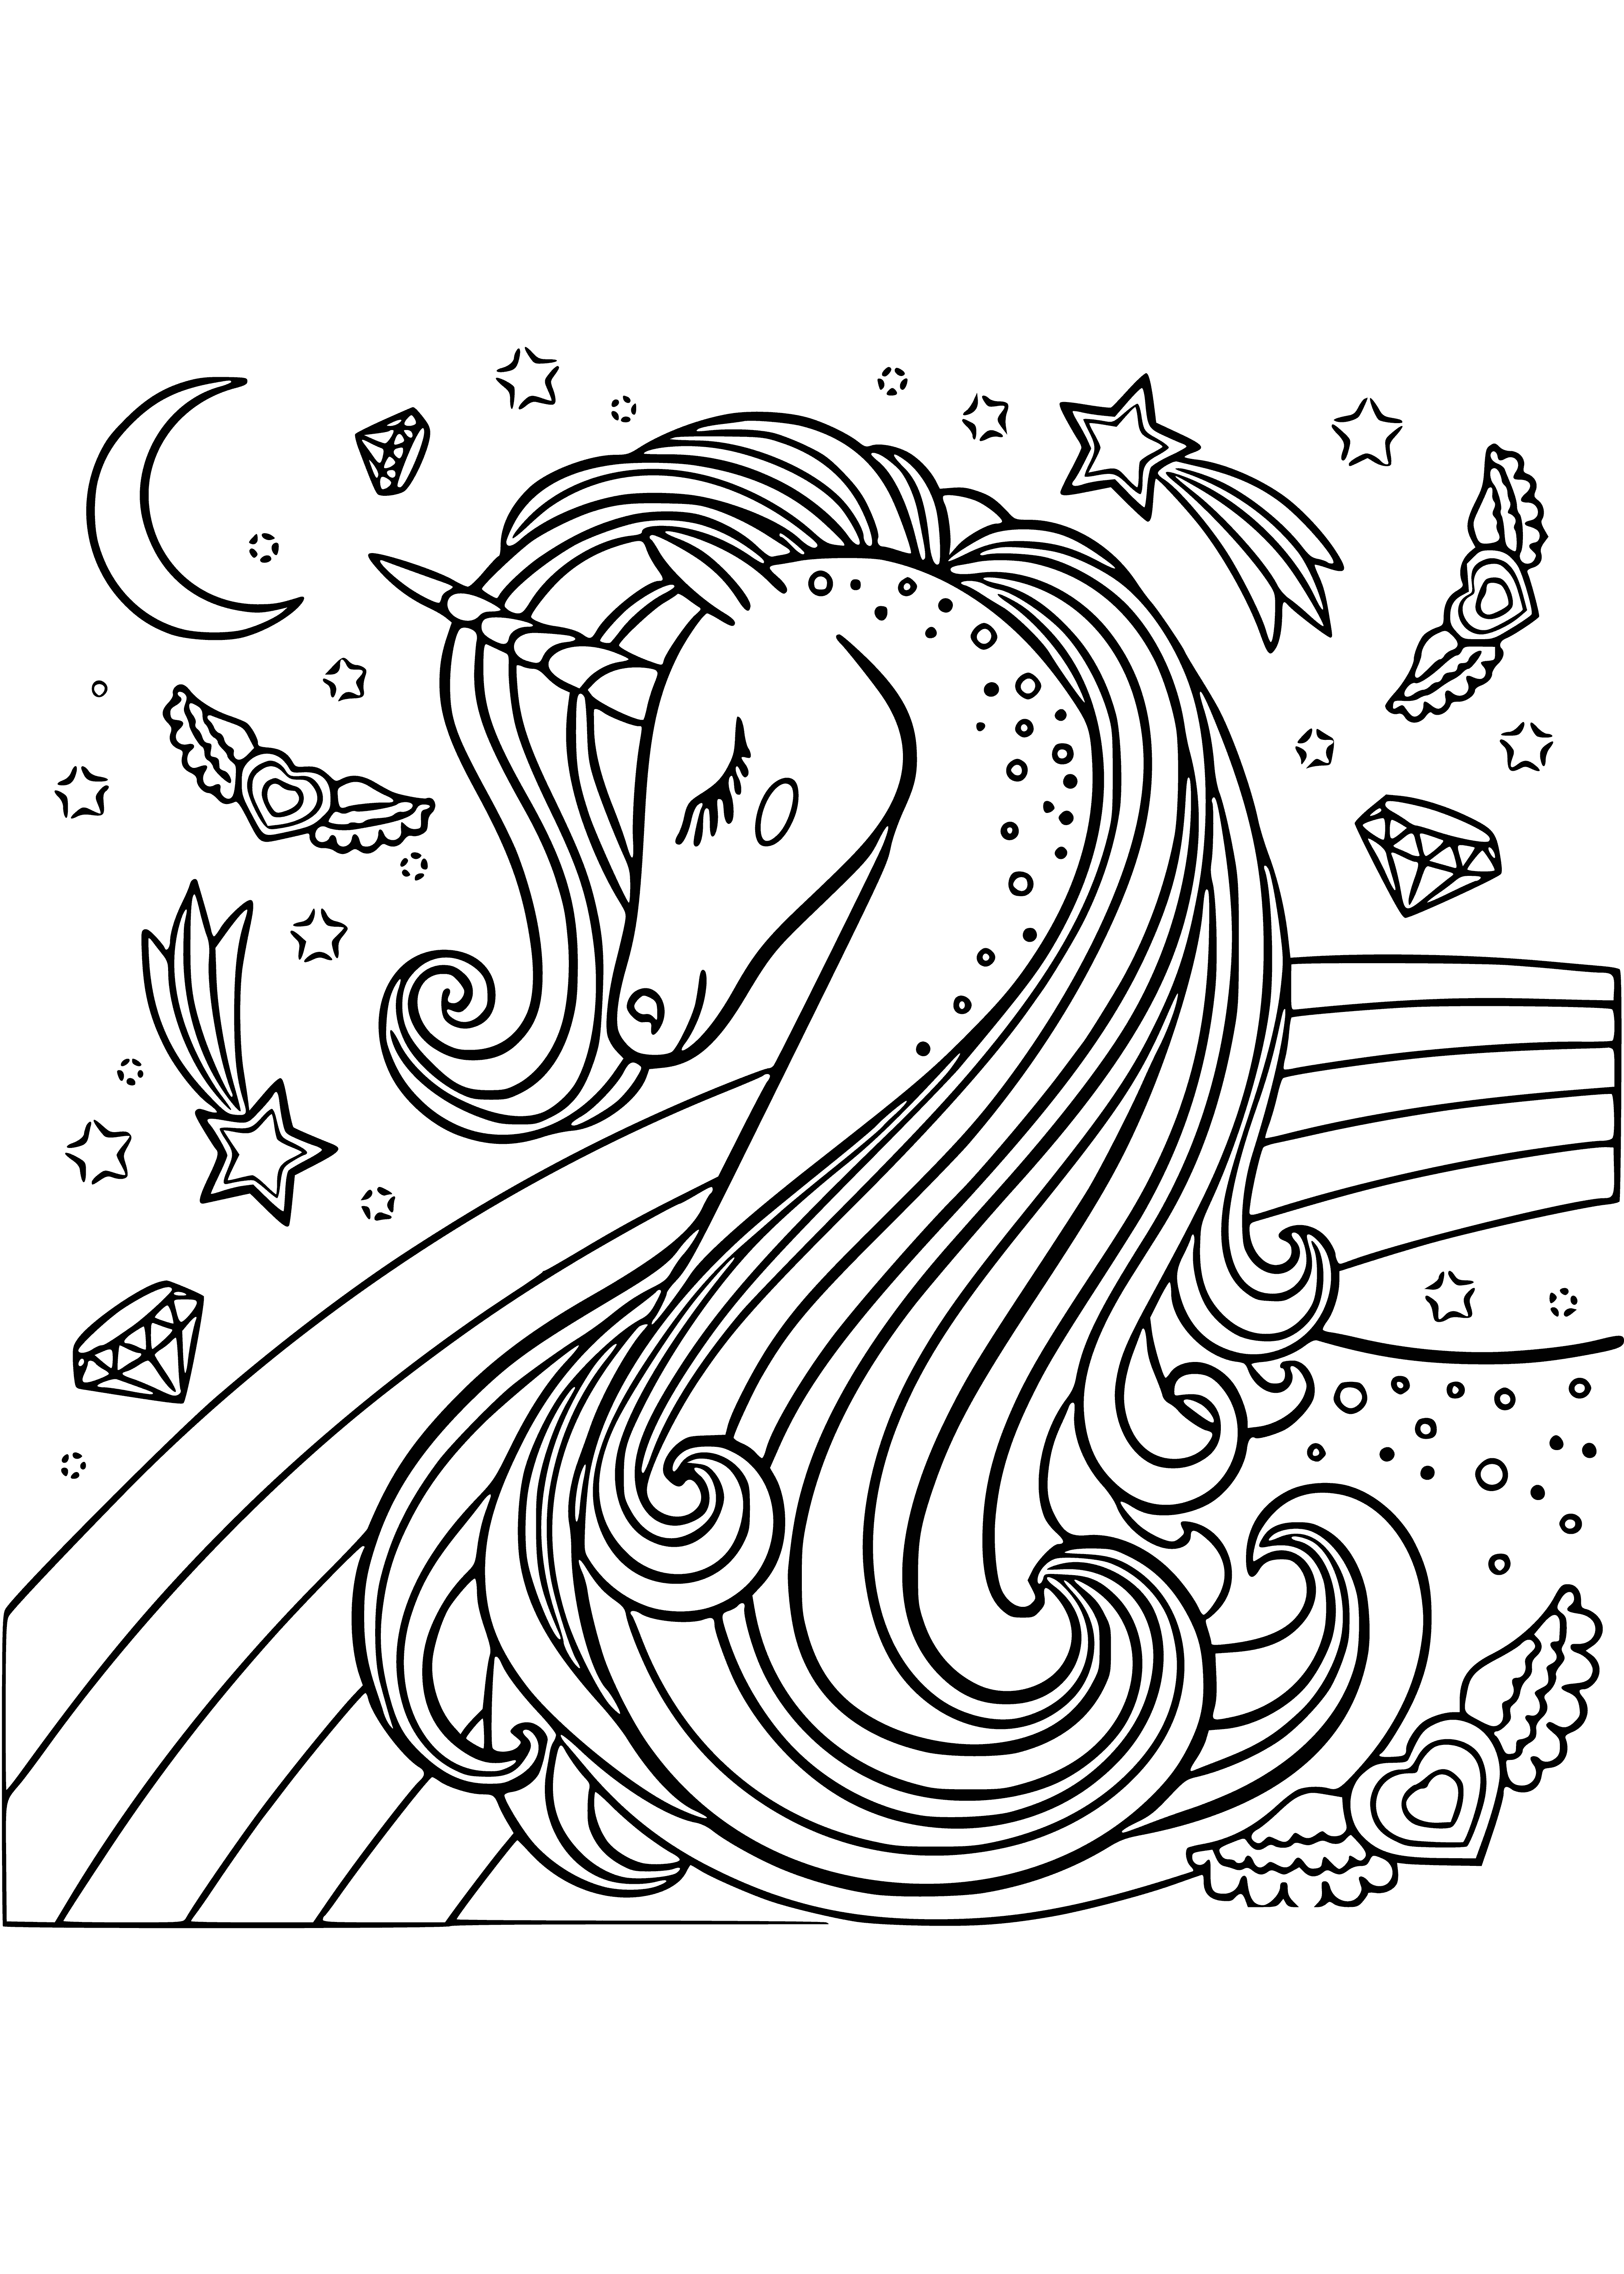 coloring page: A Unicorn with a heart-shaped balloon and flowers stands in a field of flowers with a rainbow in the background. #UnicornLivesMatter